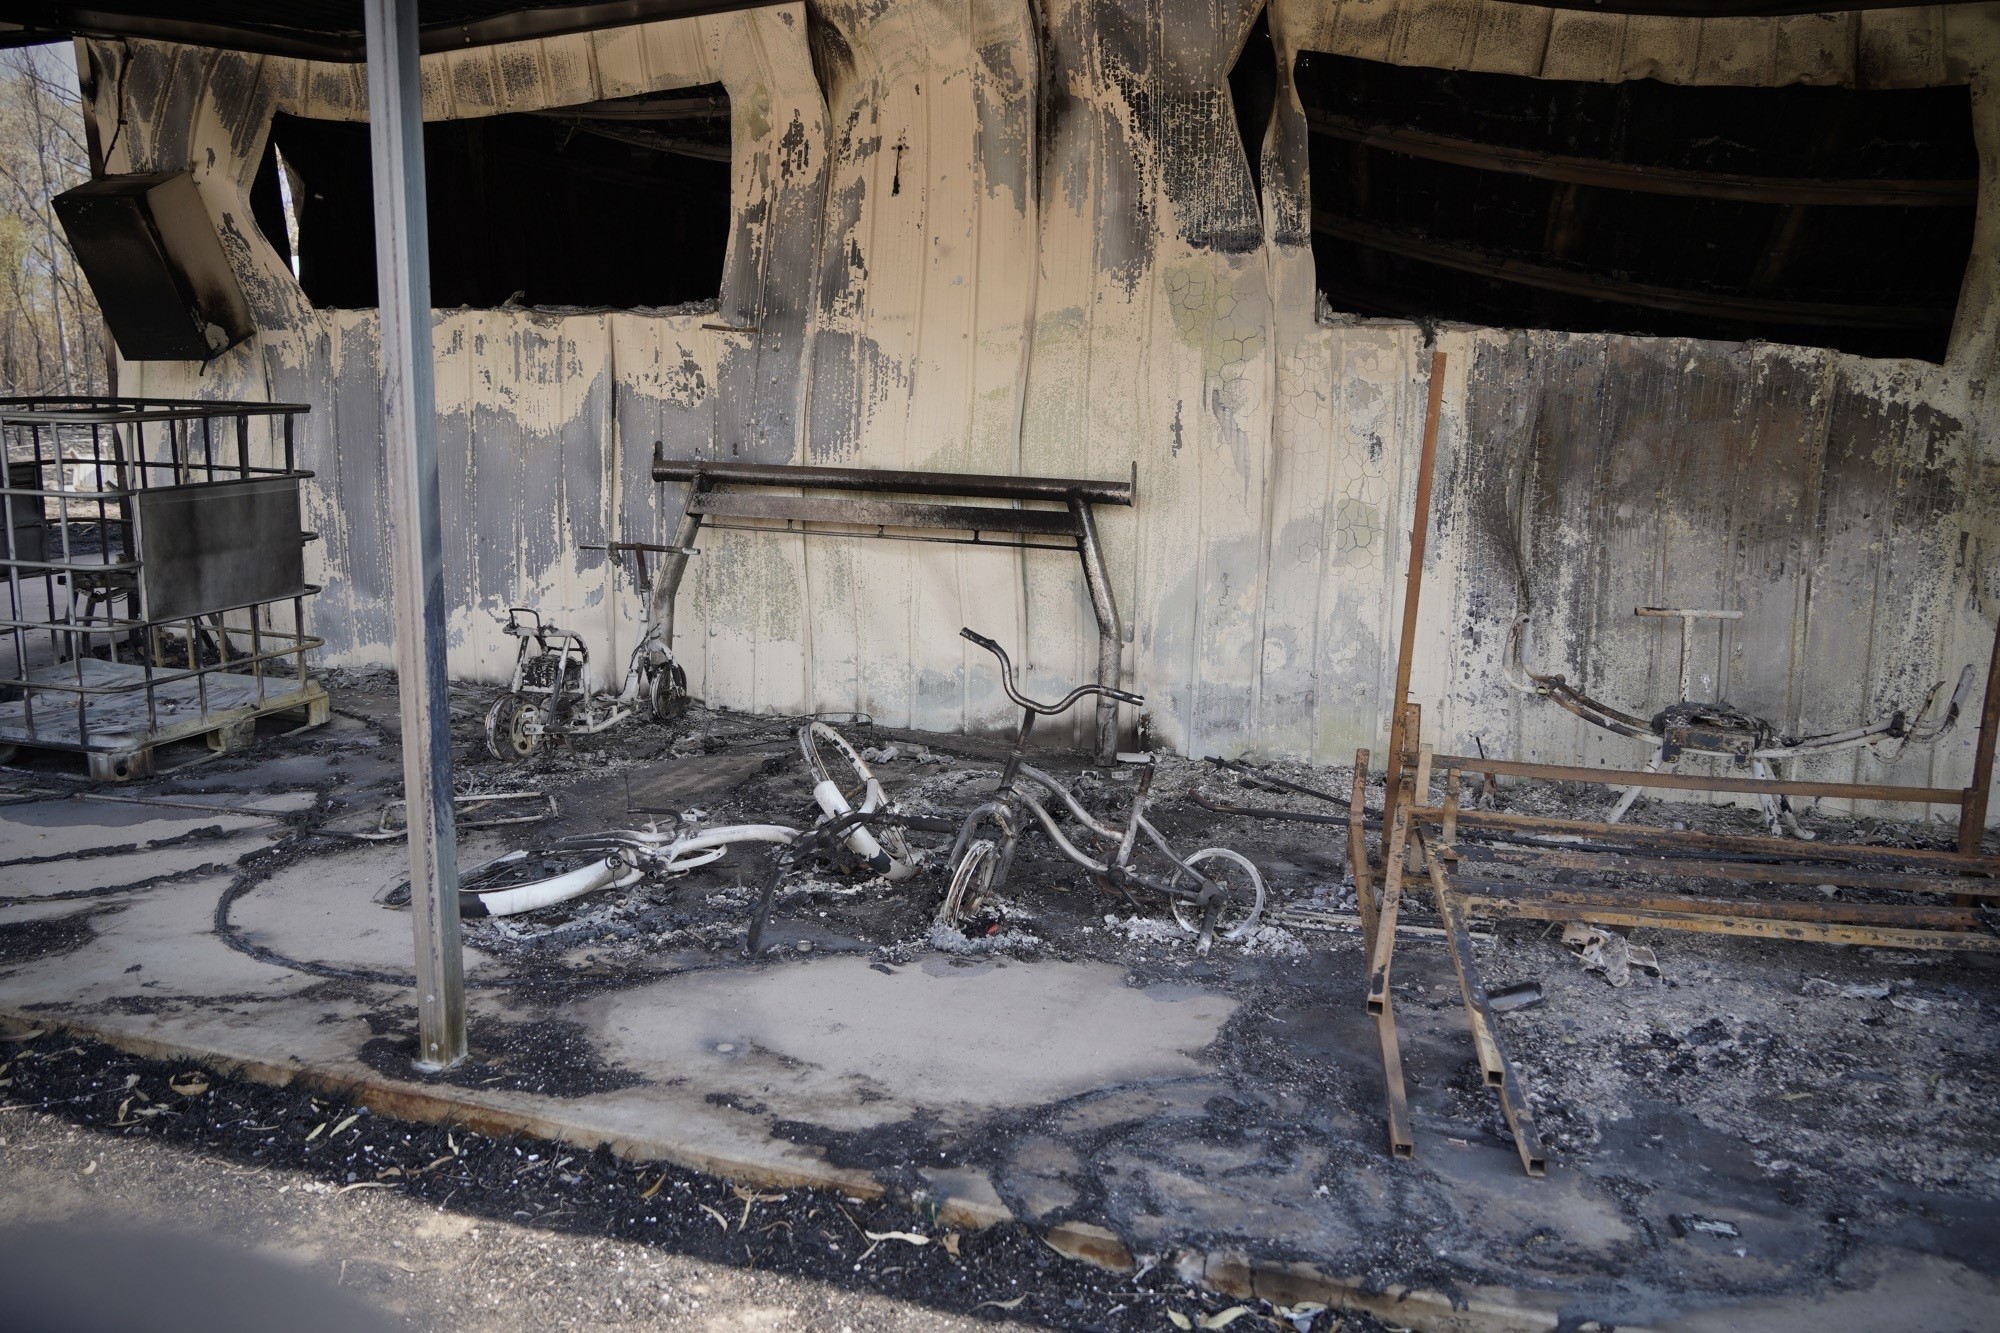 the burnt-out remains of a front porch of a home destroyed by a bushfire. kids bikes can be seen among the ashes